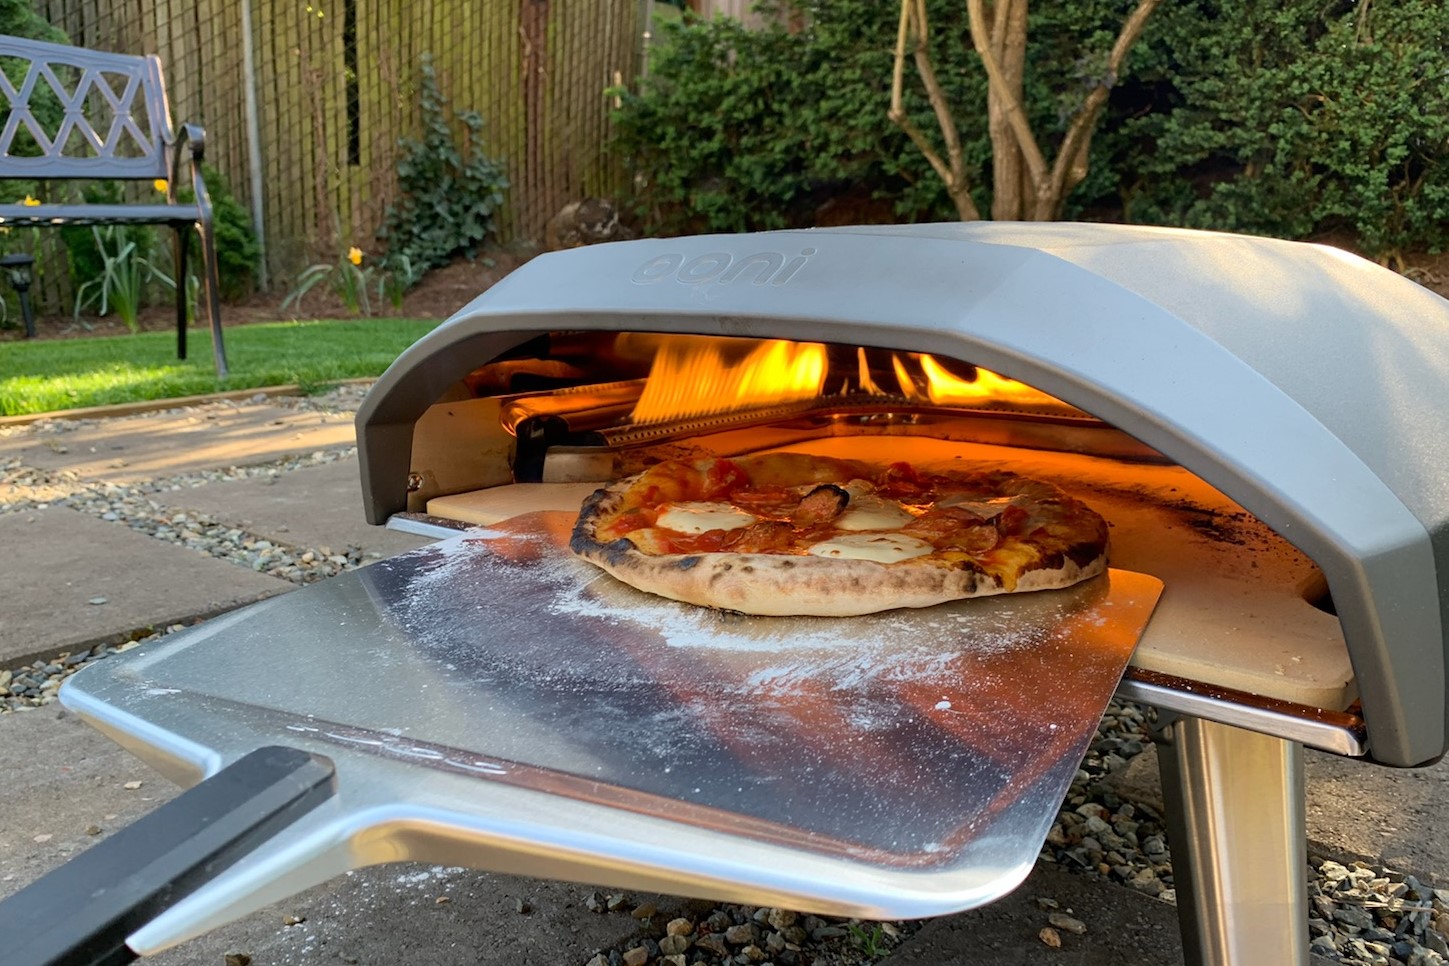 Ooni Koda 16 Review: The Perfect Oven for Quick and Easy Backyard Pizza  Parties